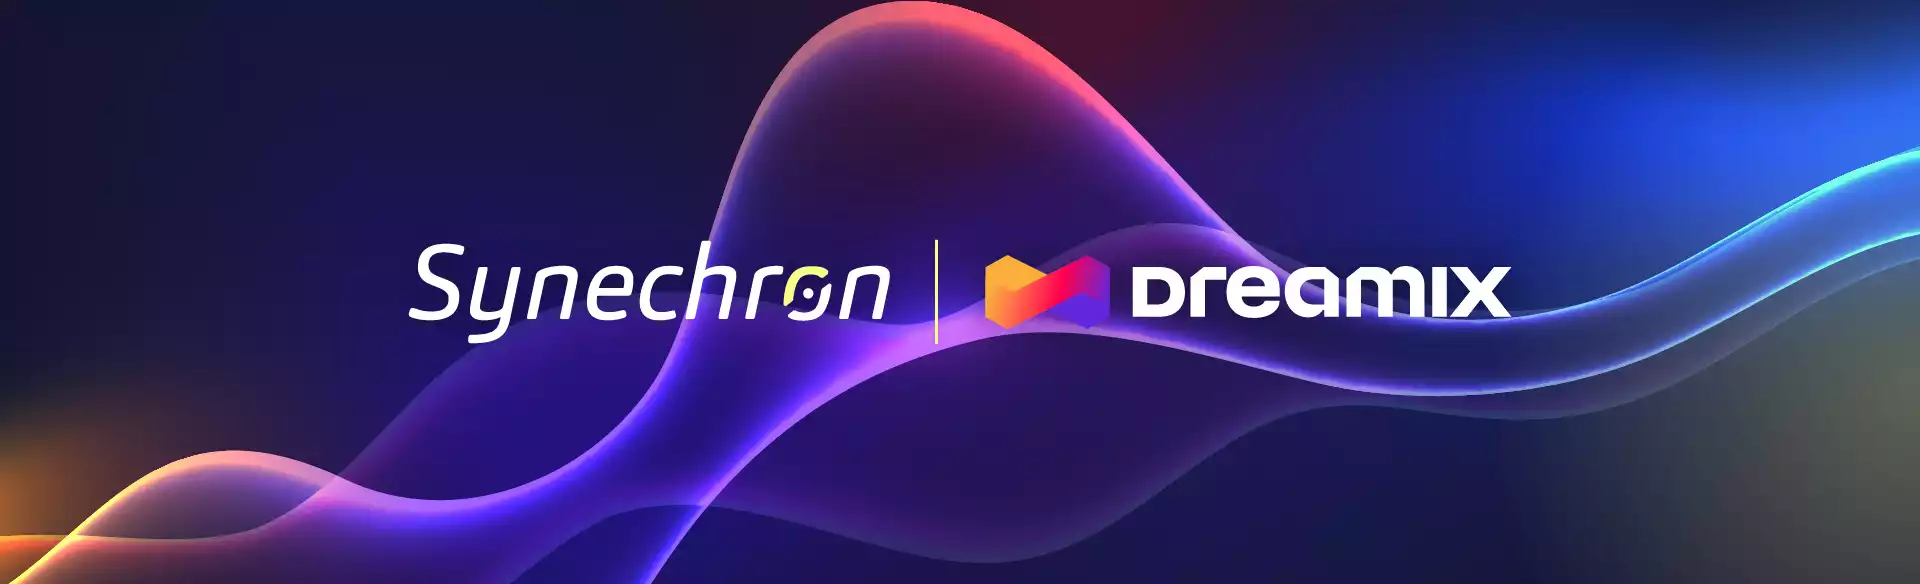 Synechron Acquires Dreamix, a Digital Product Development and Software Engineering Firm Headquartered in Sofia, Bulgaria